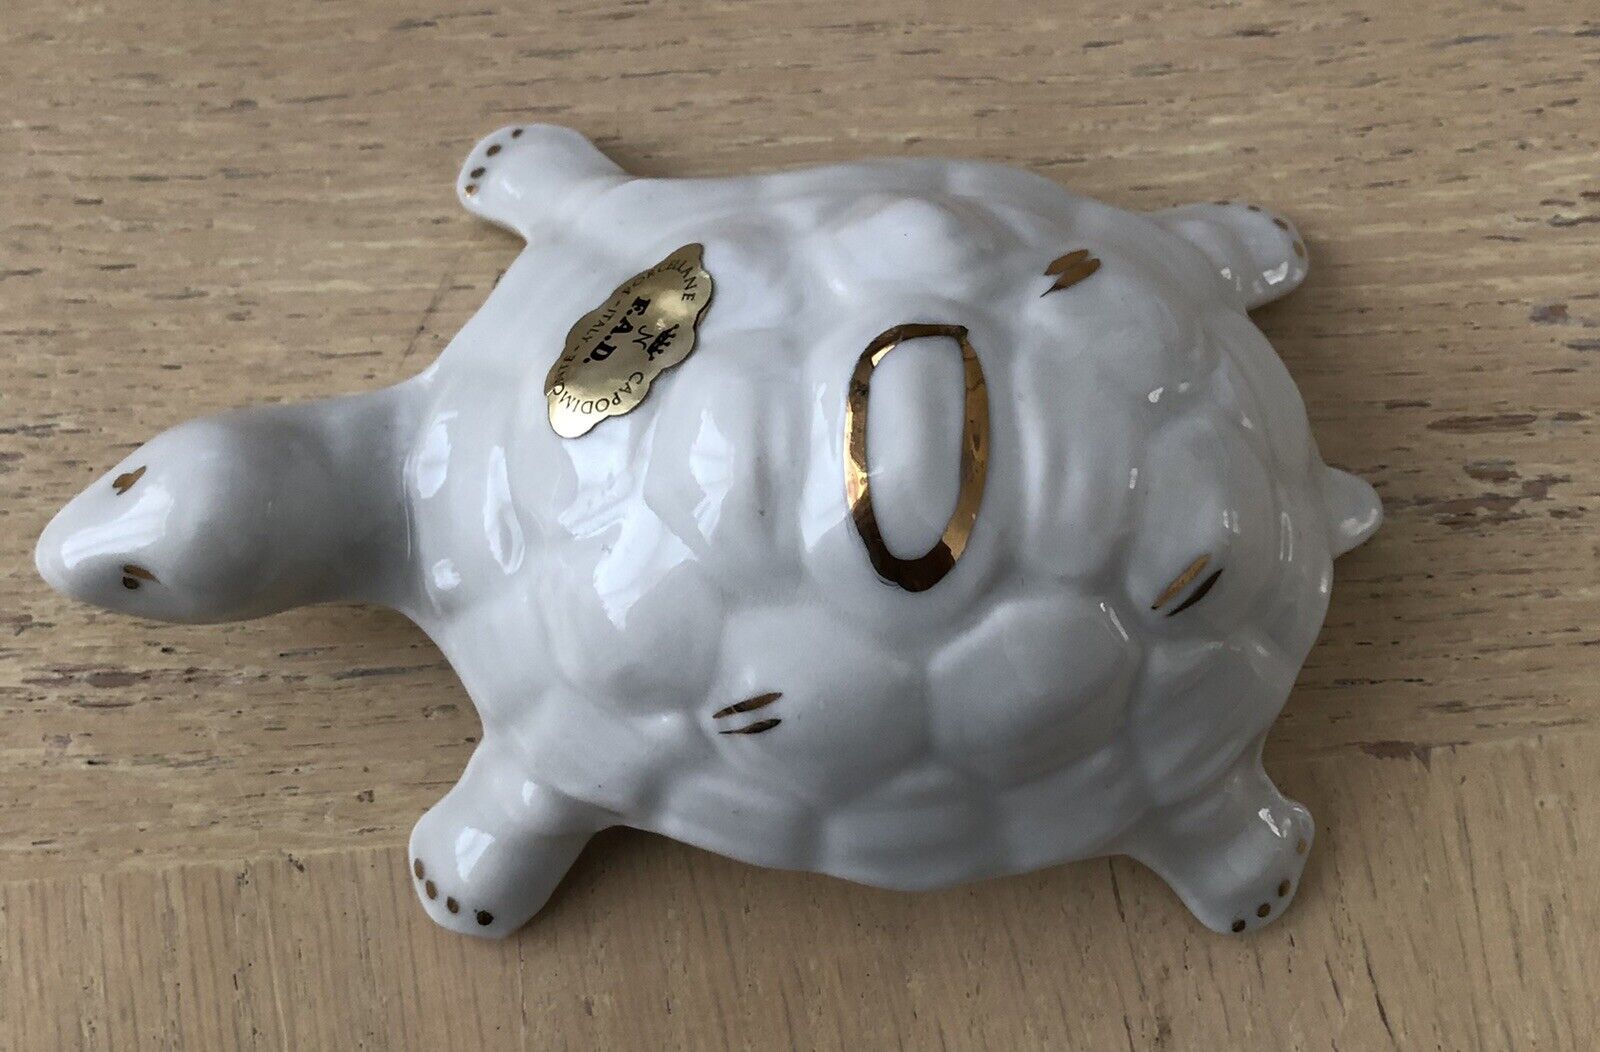 White Tortoise by Capodimonte 6” x 3.5” white and Gold Porcelain from Italy rare